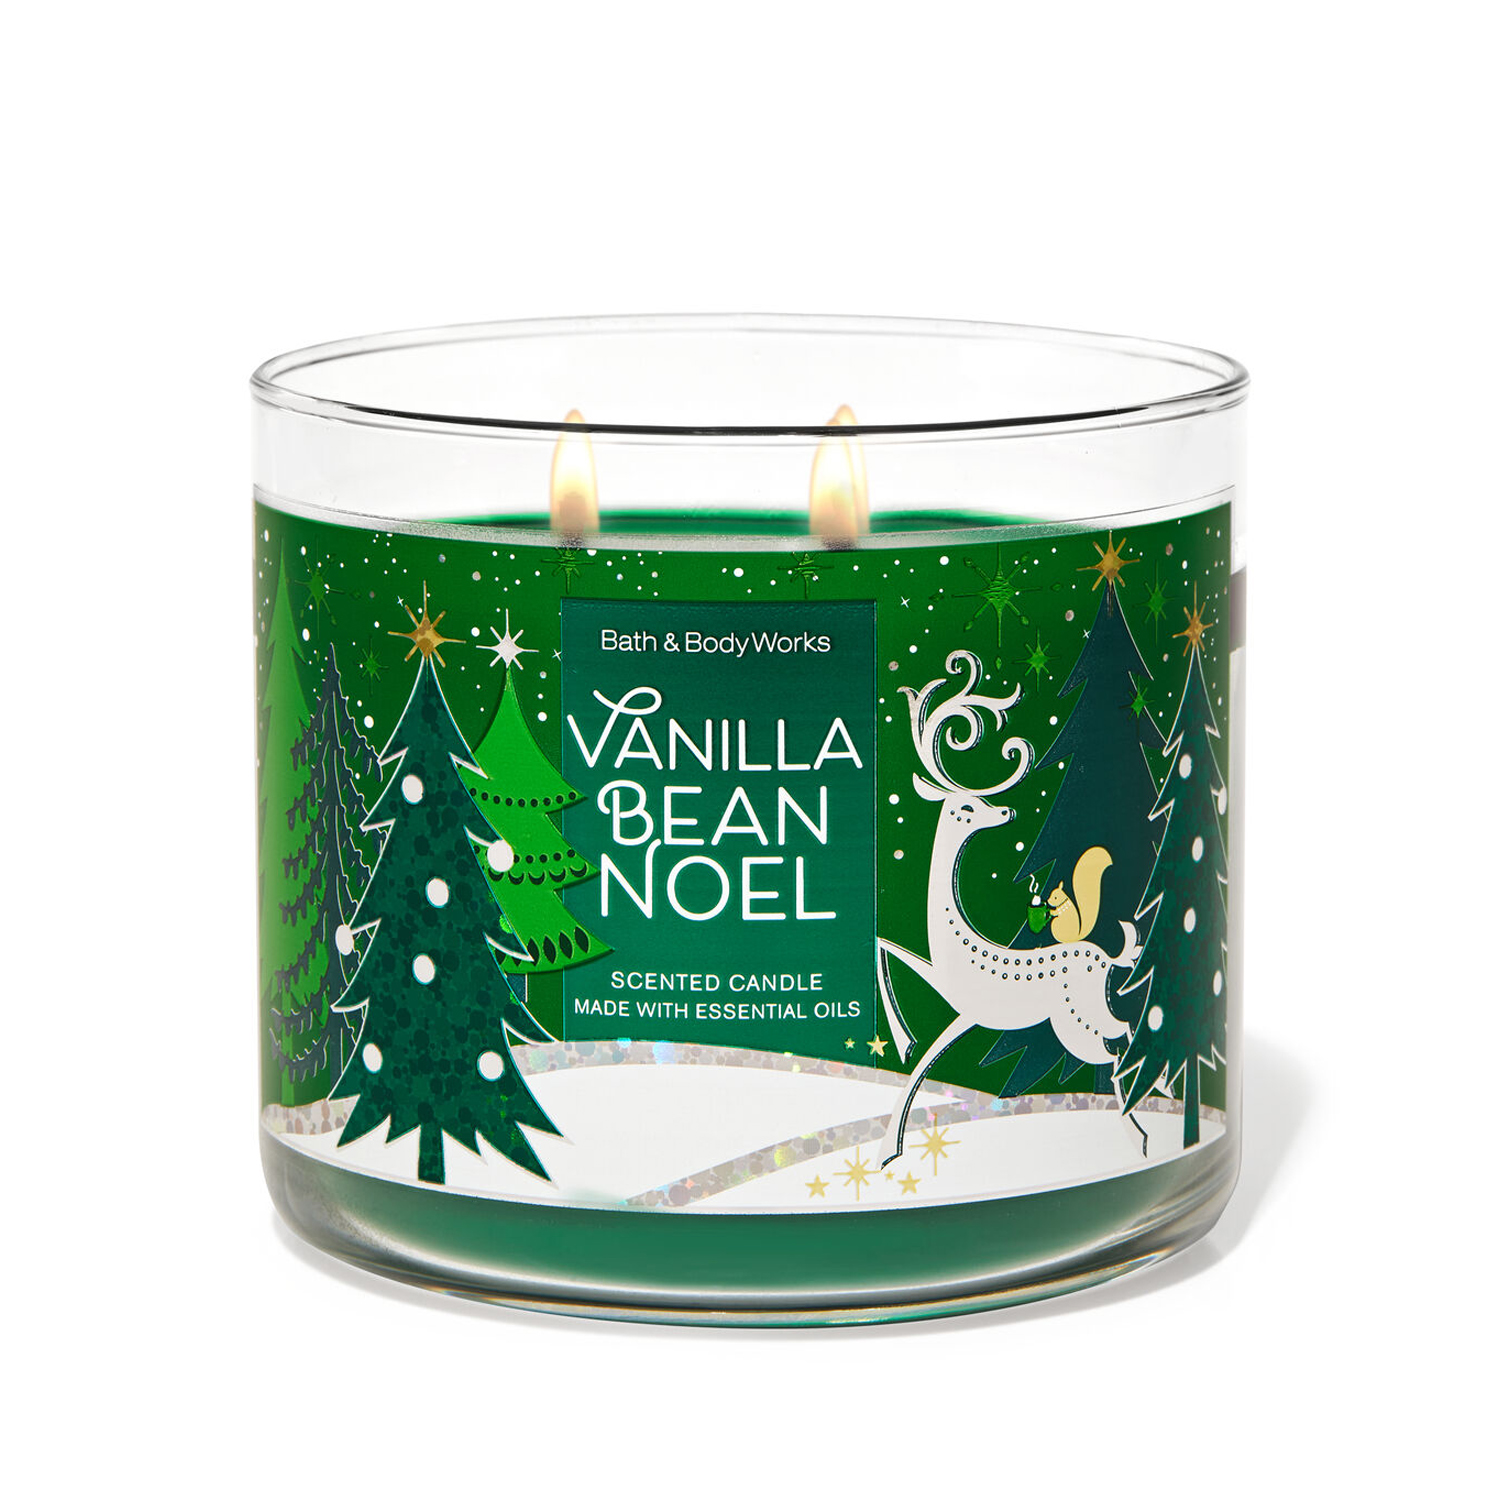 BATH & BODY WORKS PEACE VANILLA BEAN NOEL SCENTED 3-WICK 14.5 OZ LARGE CANDLE 